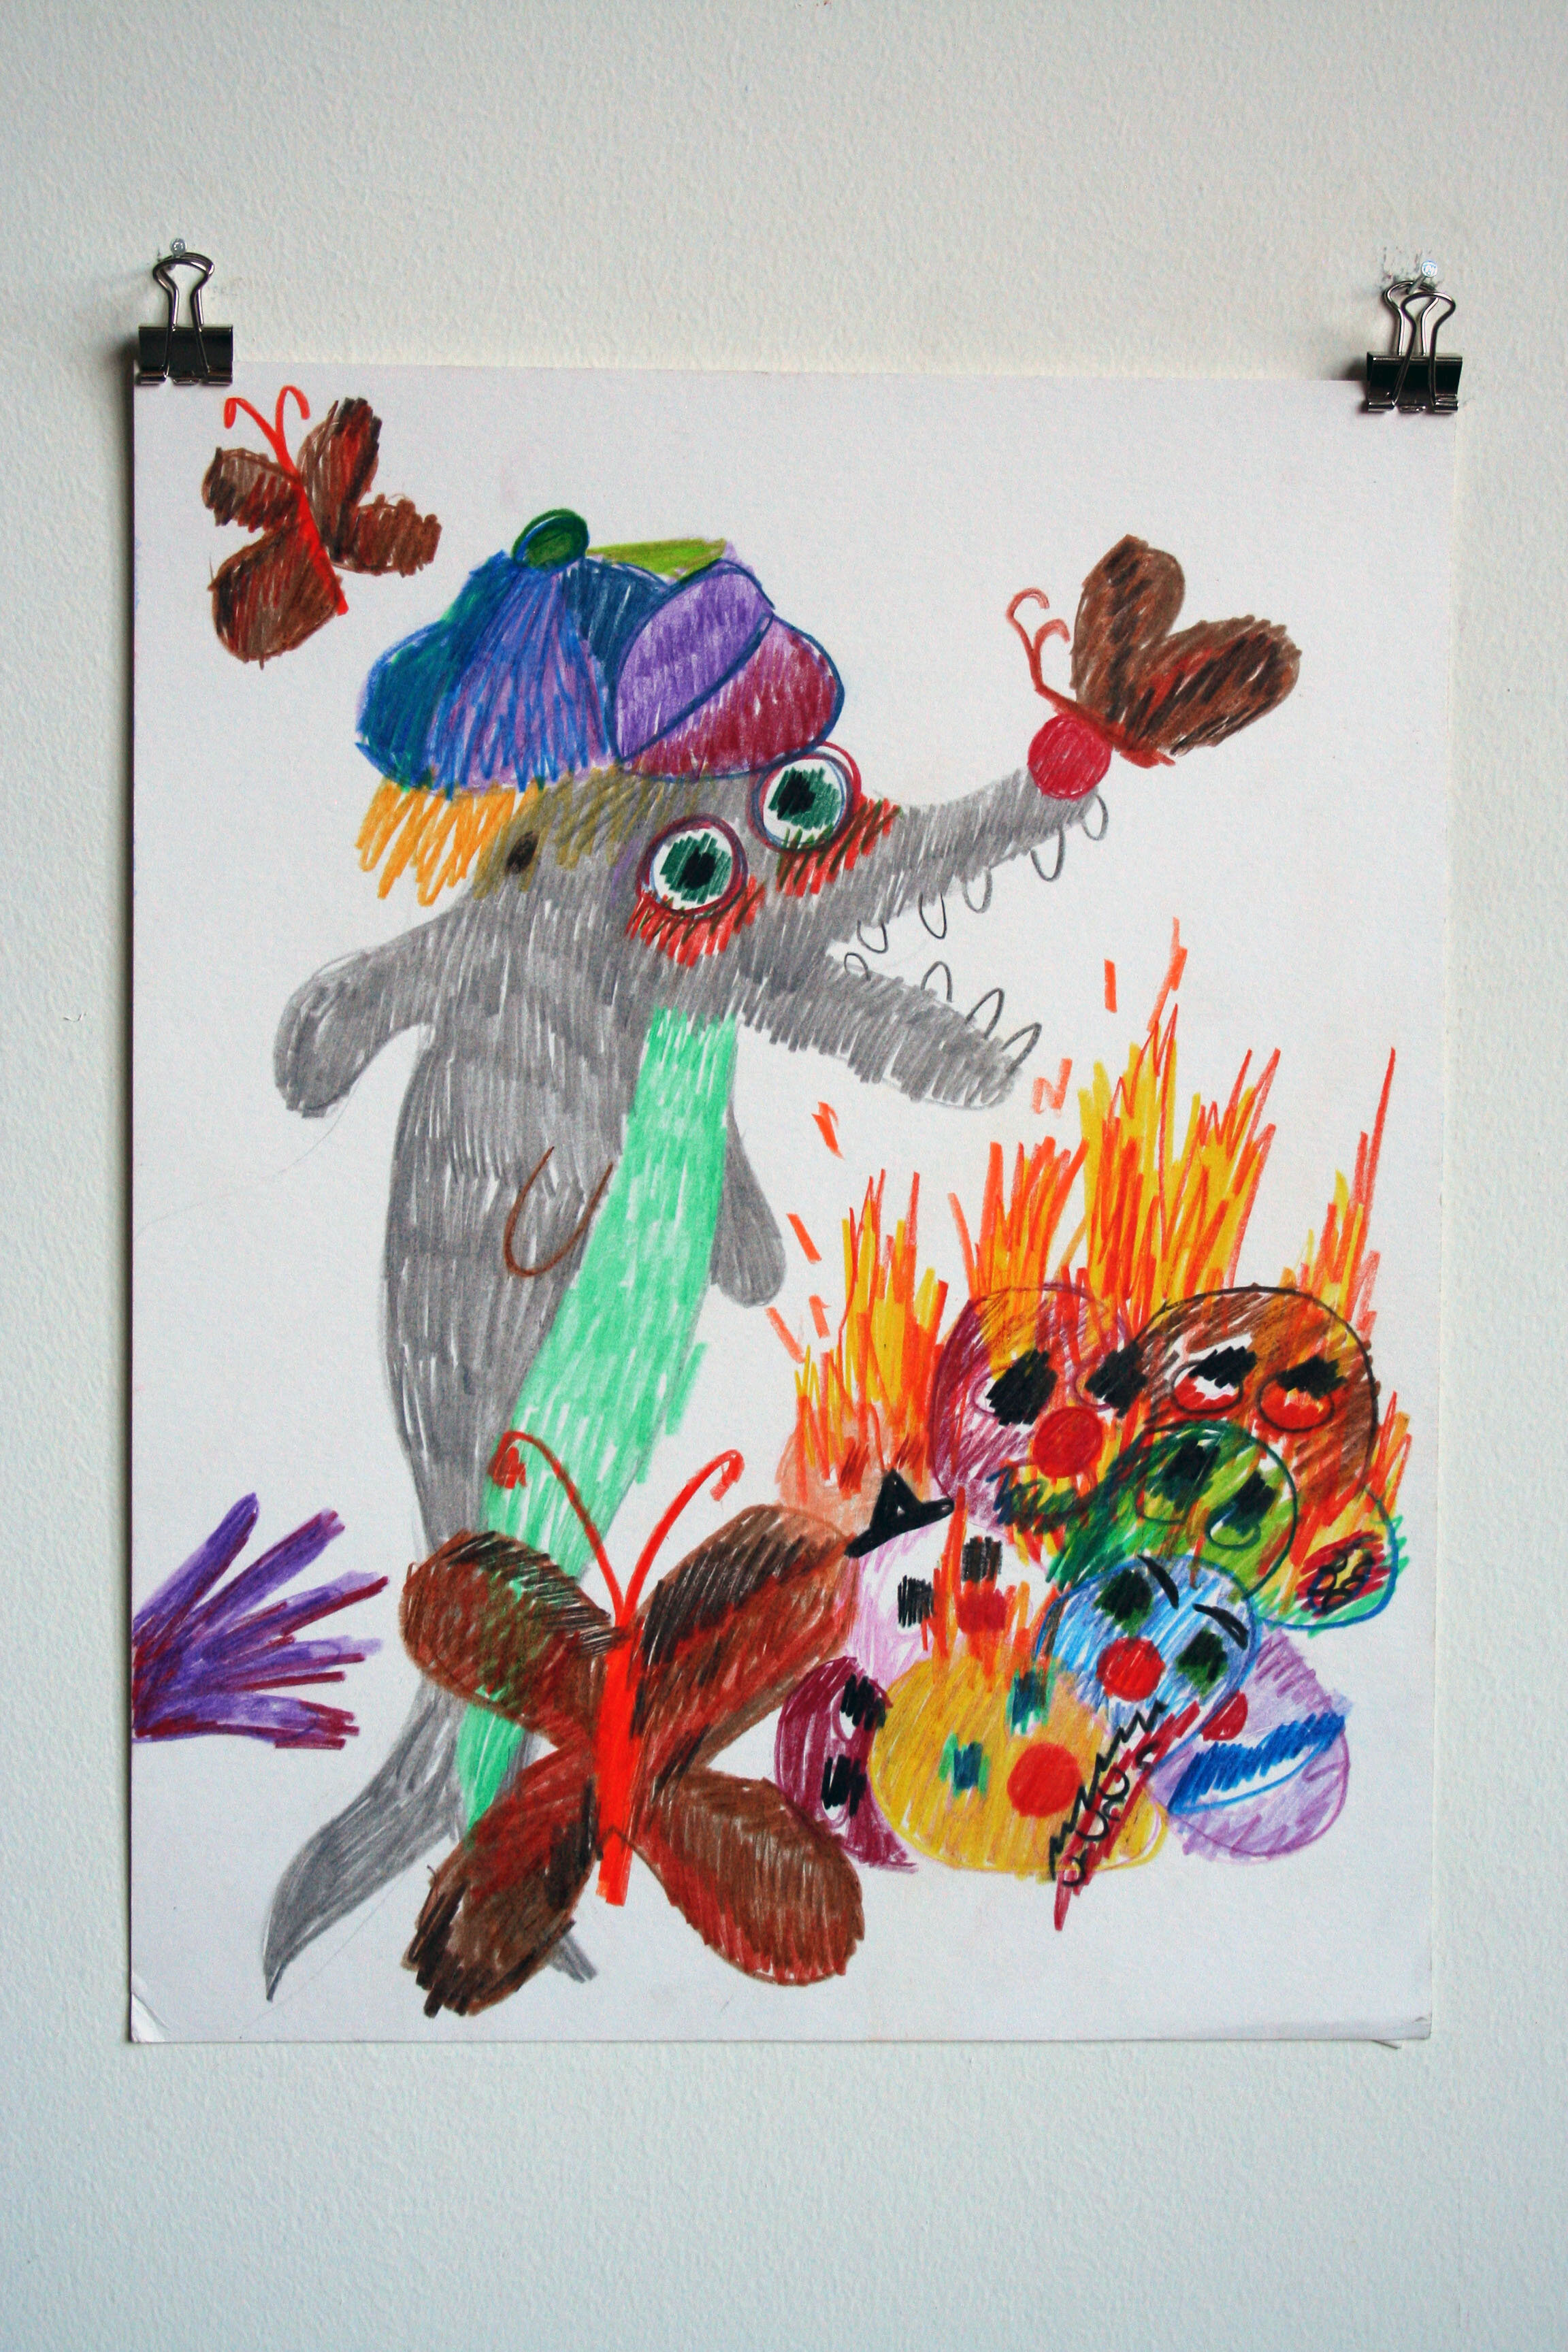   Pobody Knew How But the Masks Burned Through the Night,  2013  14 x 11 inches (35.56 x 27.94 cm.)  Colored pencil on paper 